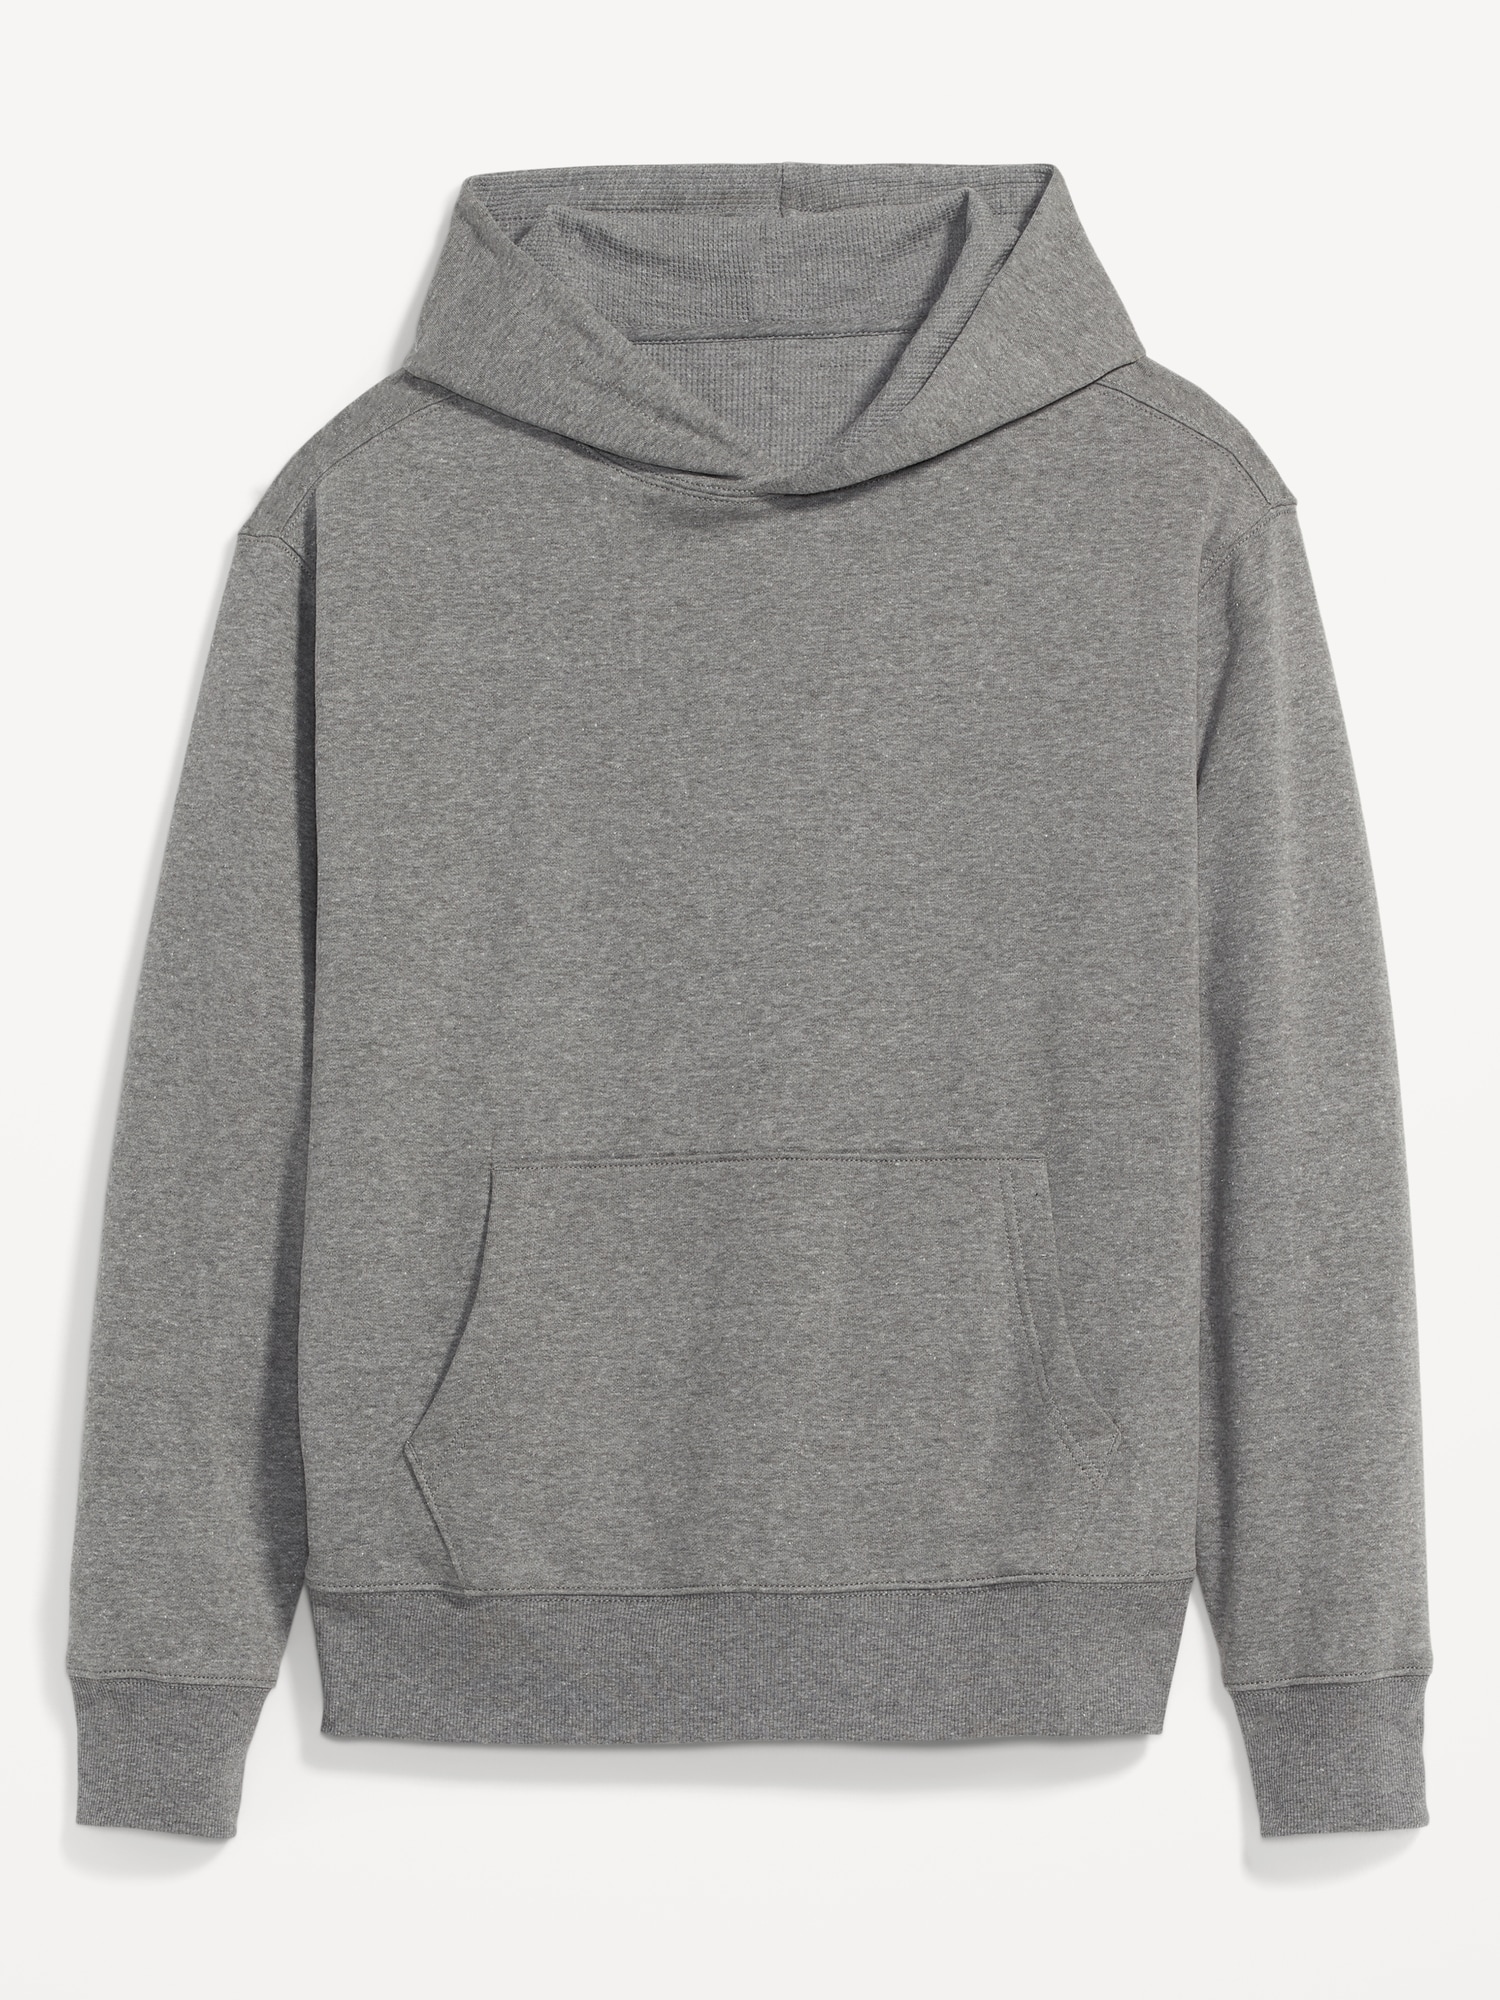 Oversized Thermal-Lined Pullover Hoodie | Old Navy